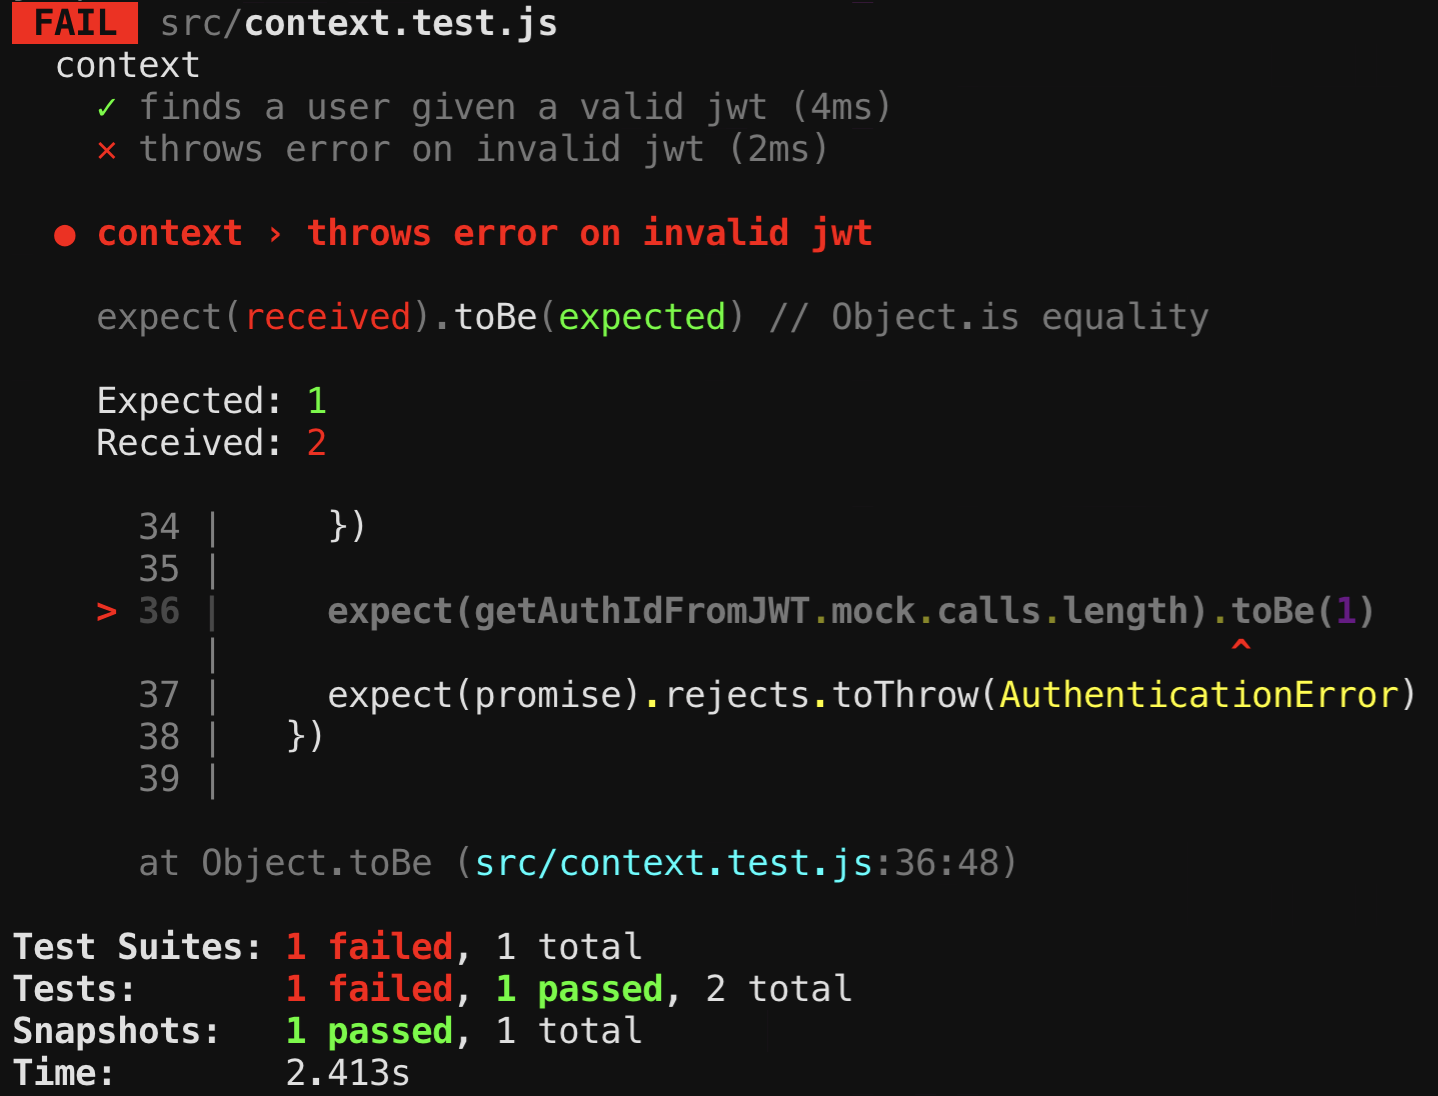 Invalid jwt test fails, receiving 2 instead of 1